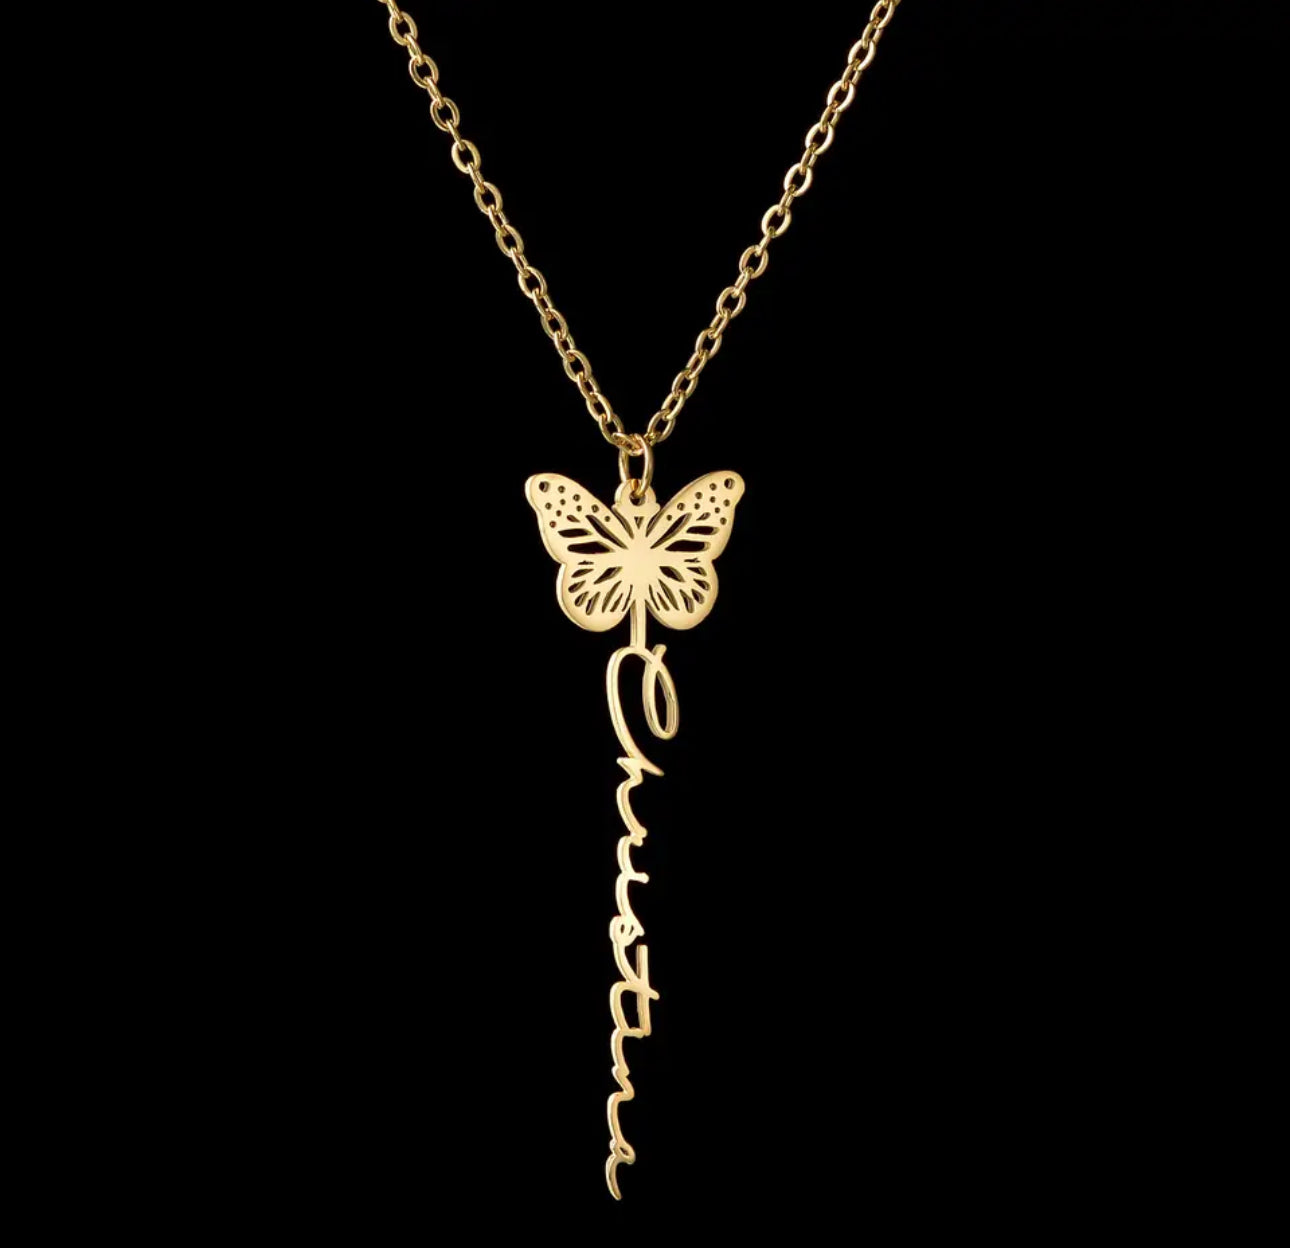 Gold plated stainless steel Butterfly name necklace